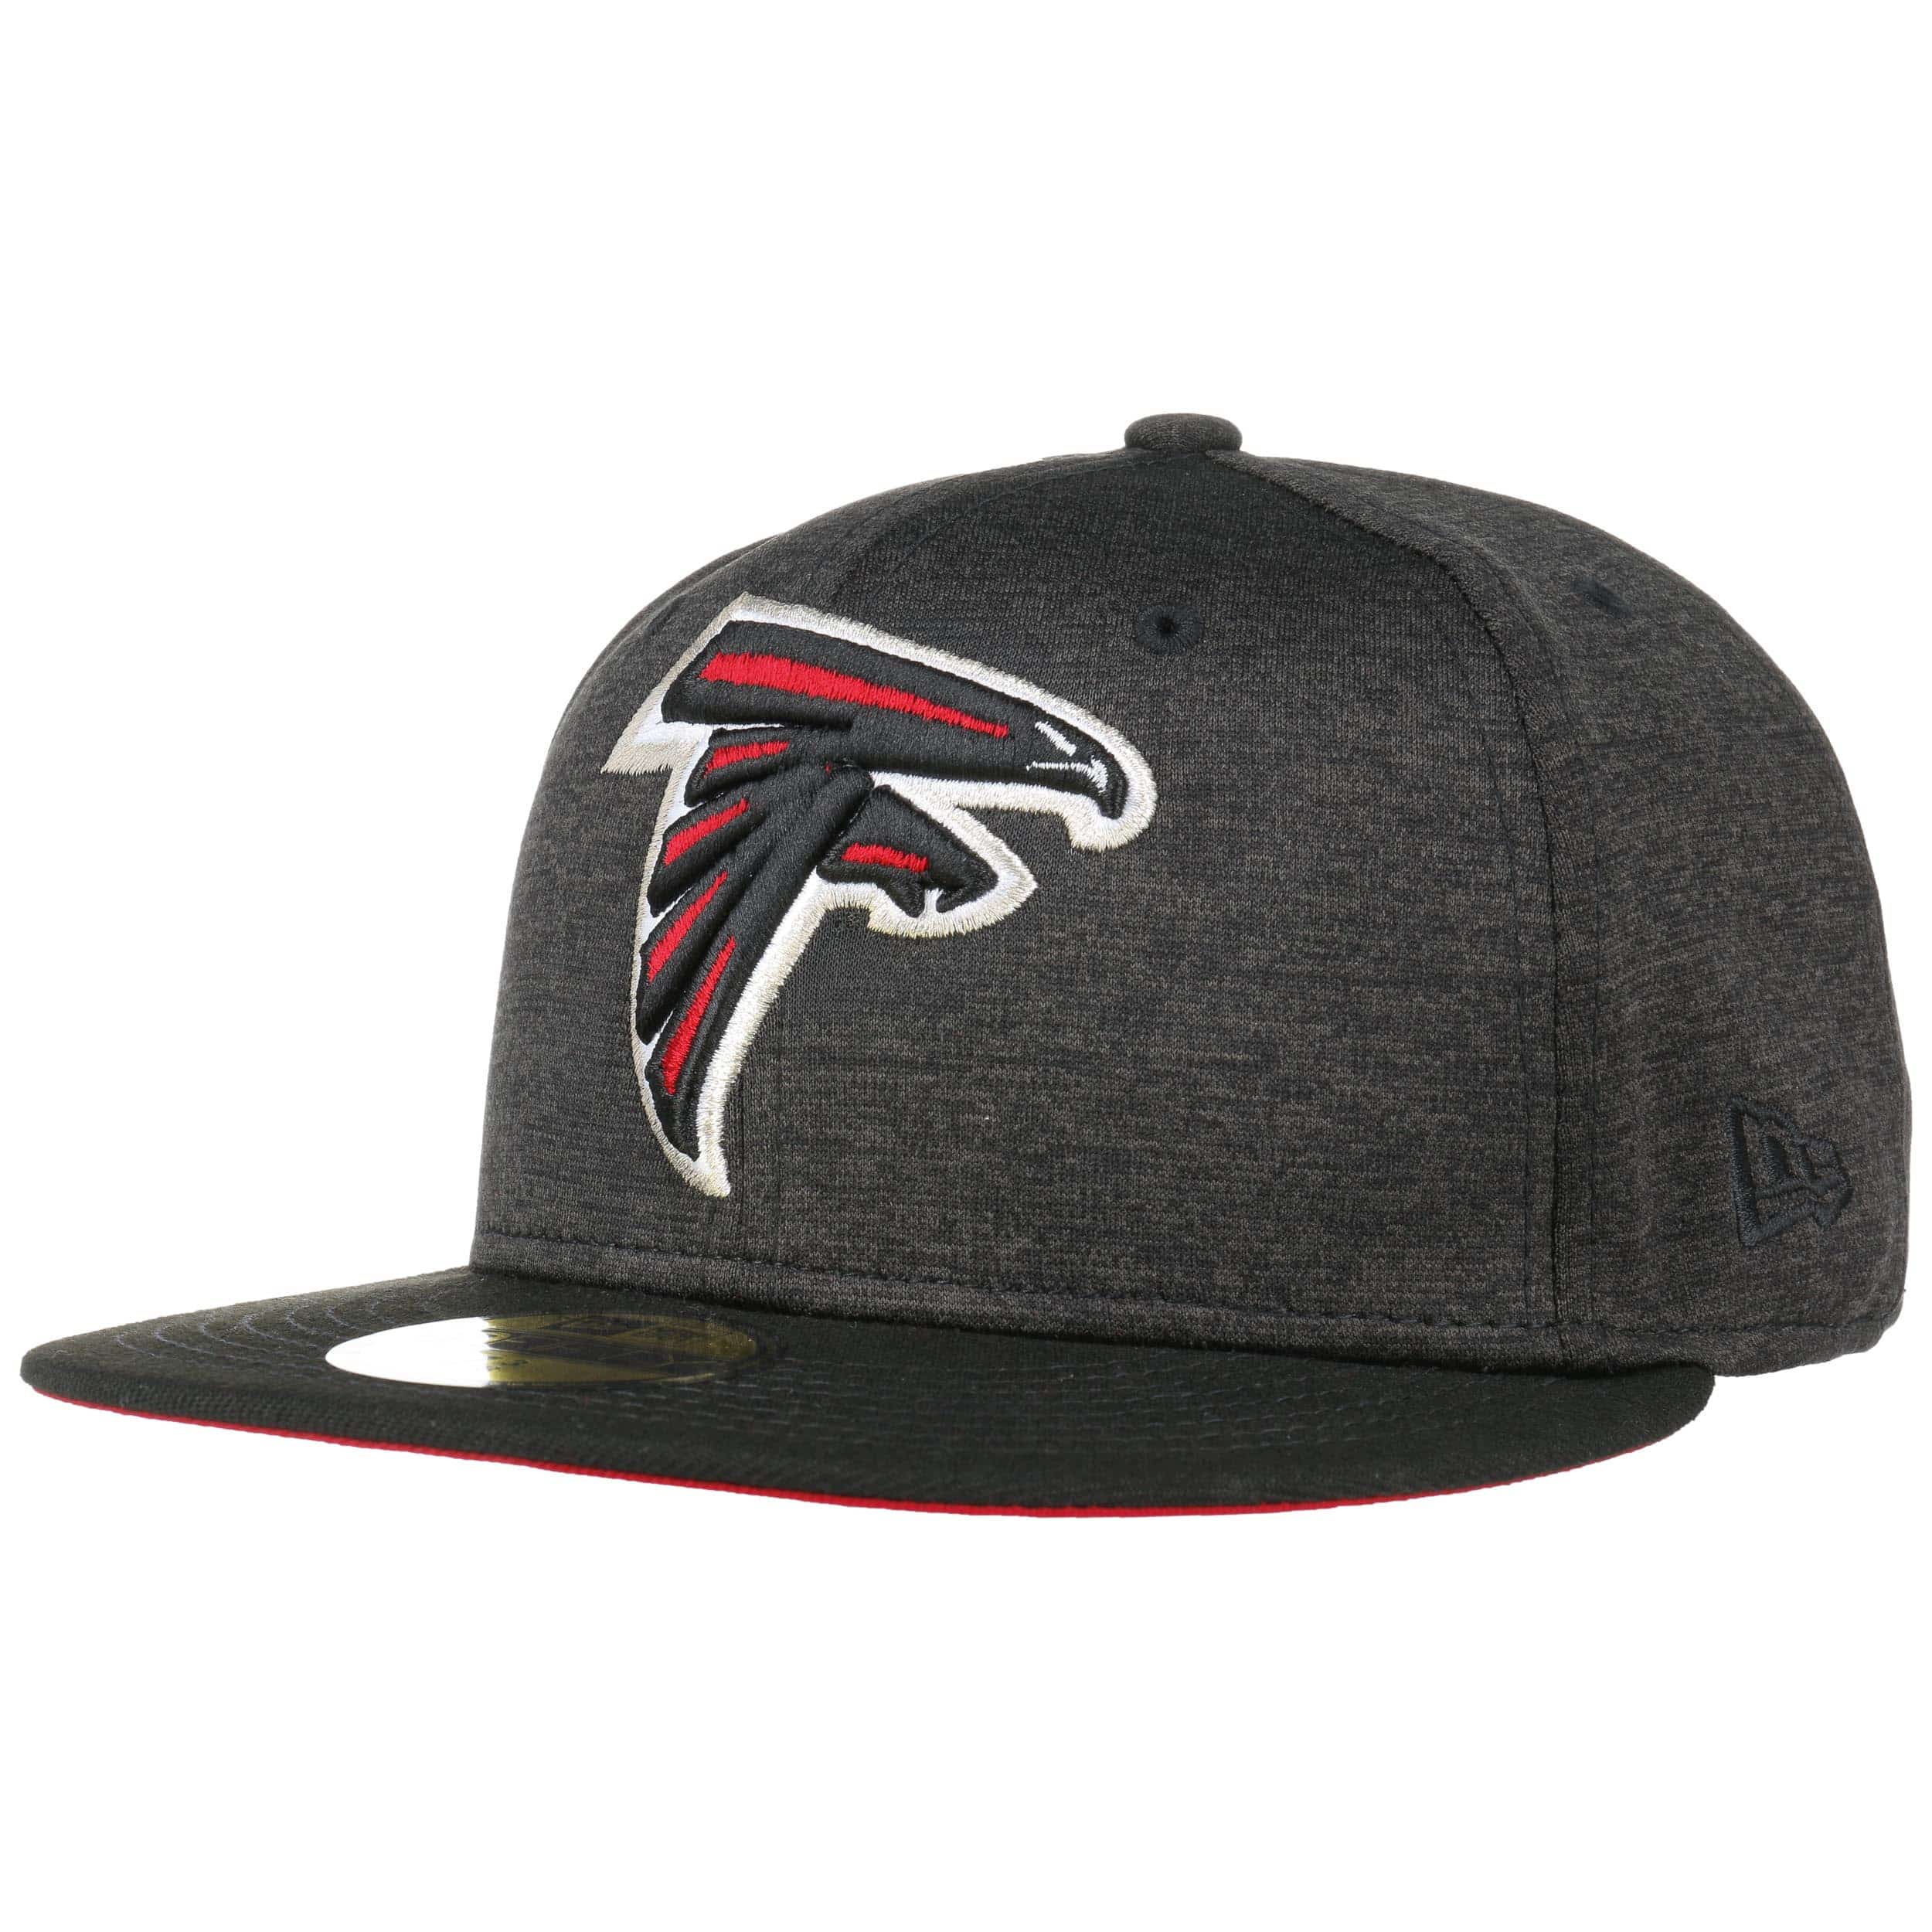 59Fifty Shadow Tech Falcons Cap by New 